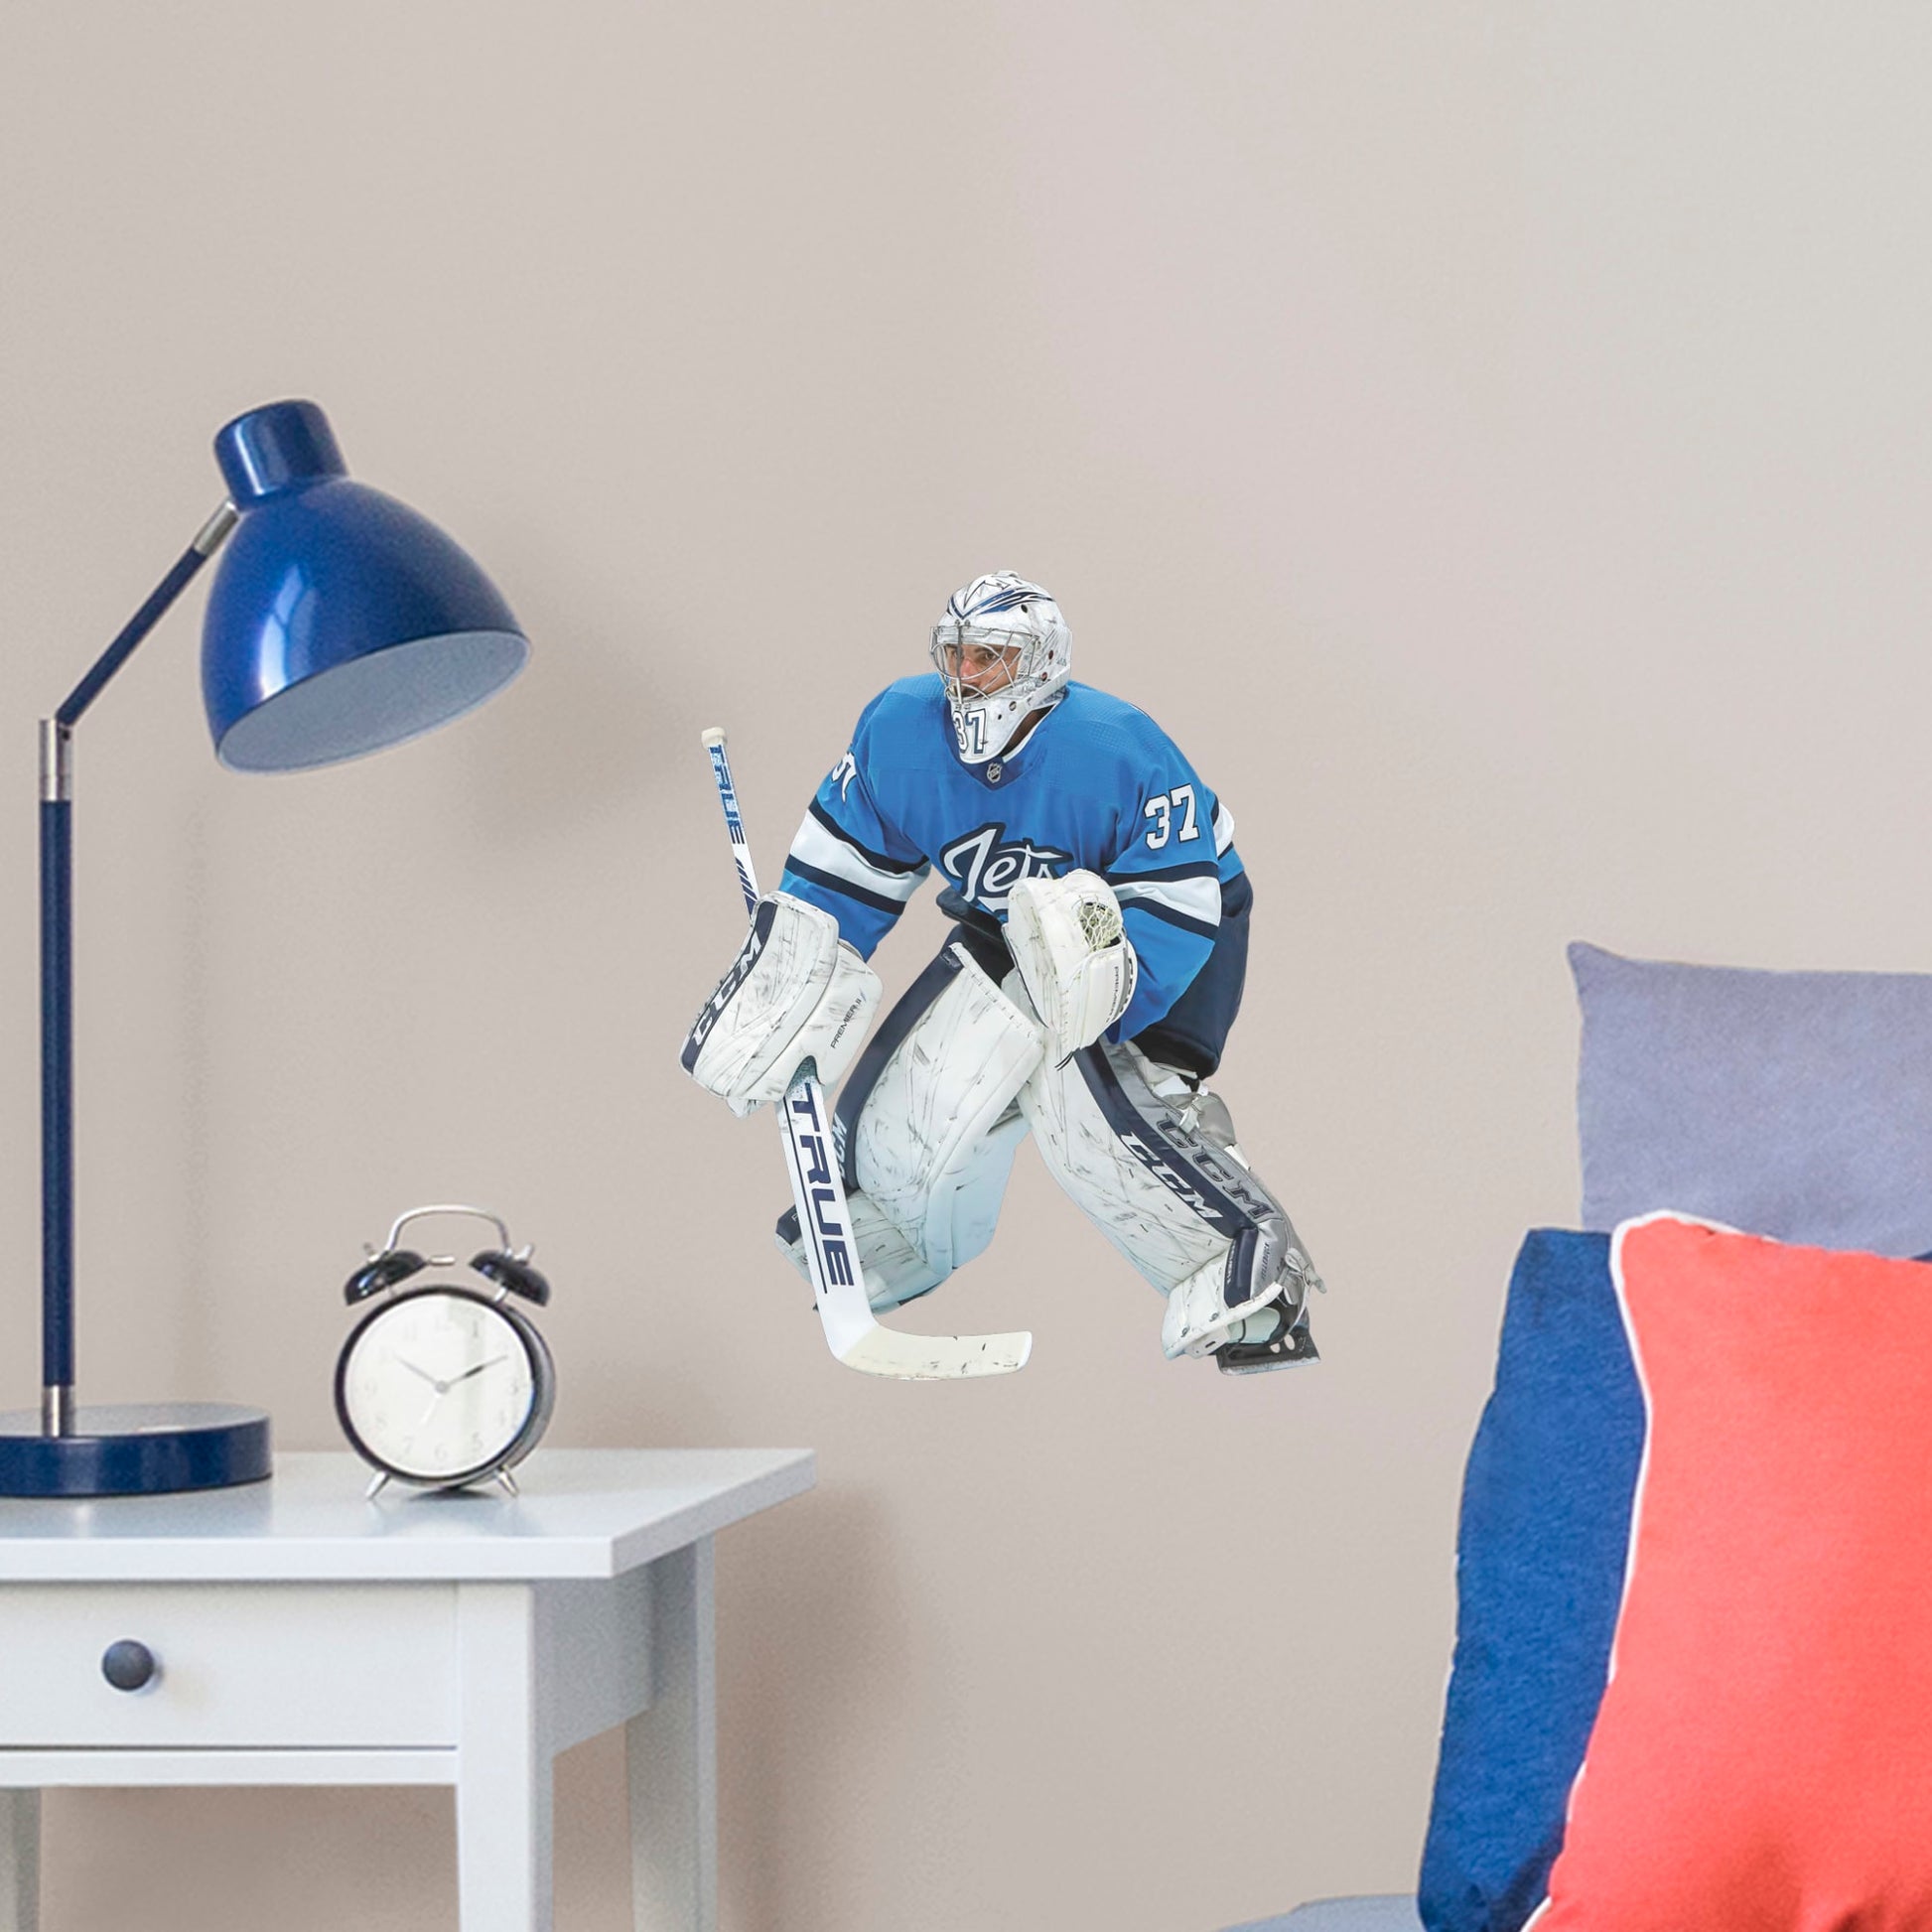 Large Athlete + 2 Decals (12"W x 15"H) Opposing teams should be worried when they see Connor Hellebuyck in the goal, and now you can bring his epic defense skills to life in your own home with this Officially Licensed NHL removable wall decal. Pictured here ready to stop any puck that comes his way, this wall decal of Hellebuyck will make the perfect addition to your bedroom, office, or fan room, and it even makes a great gift for your favorite Jets fanatic!